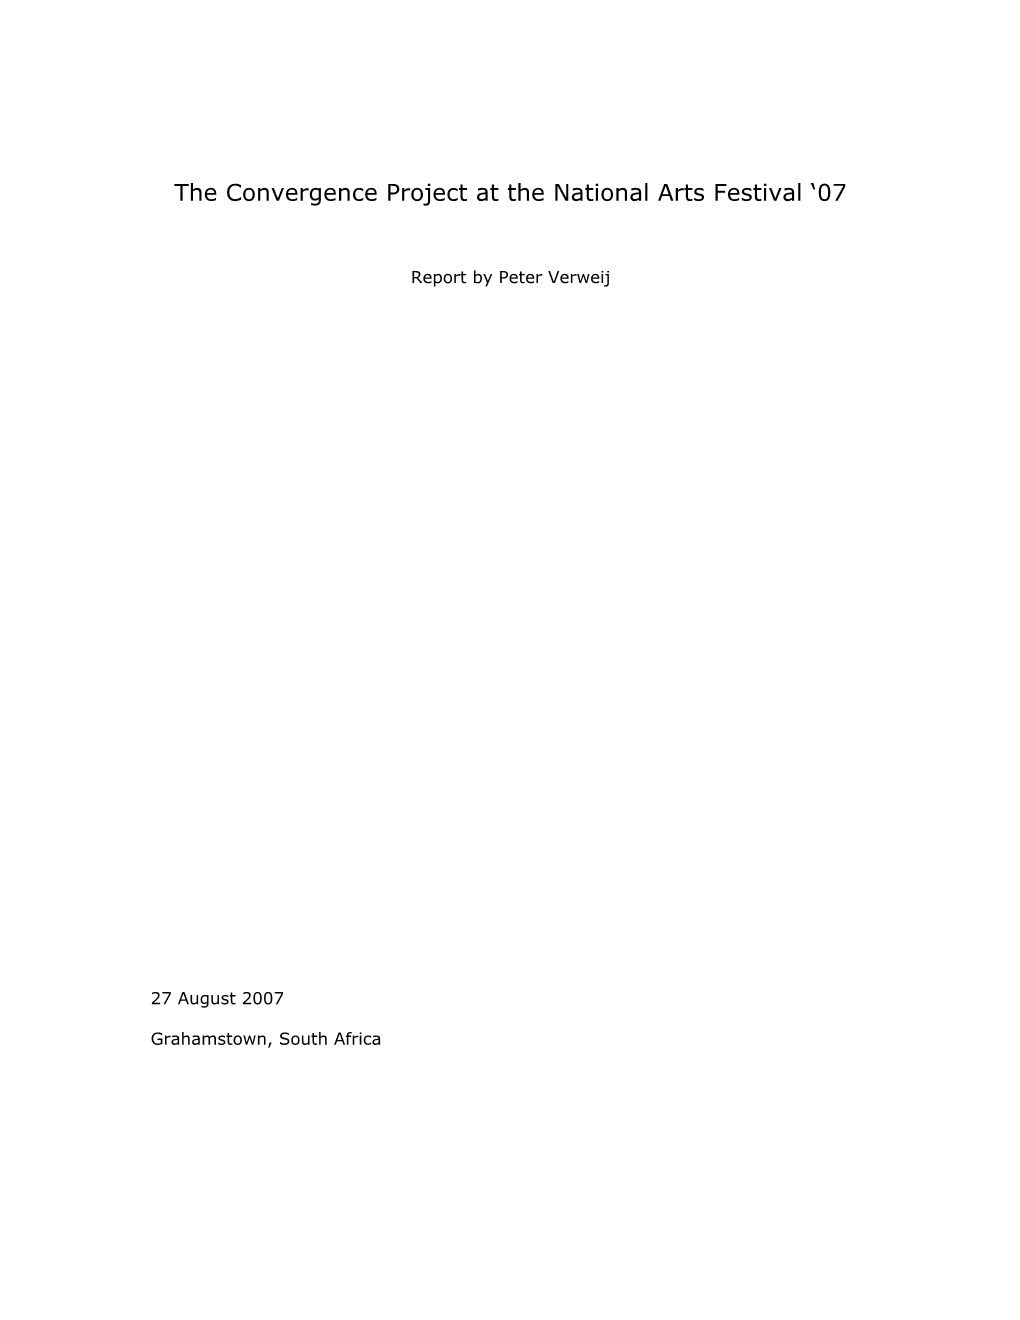 Report on the Convergence Project at the National Arts Festival